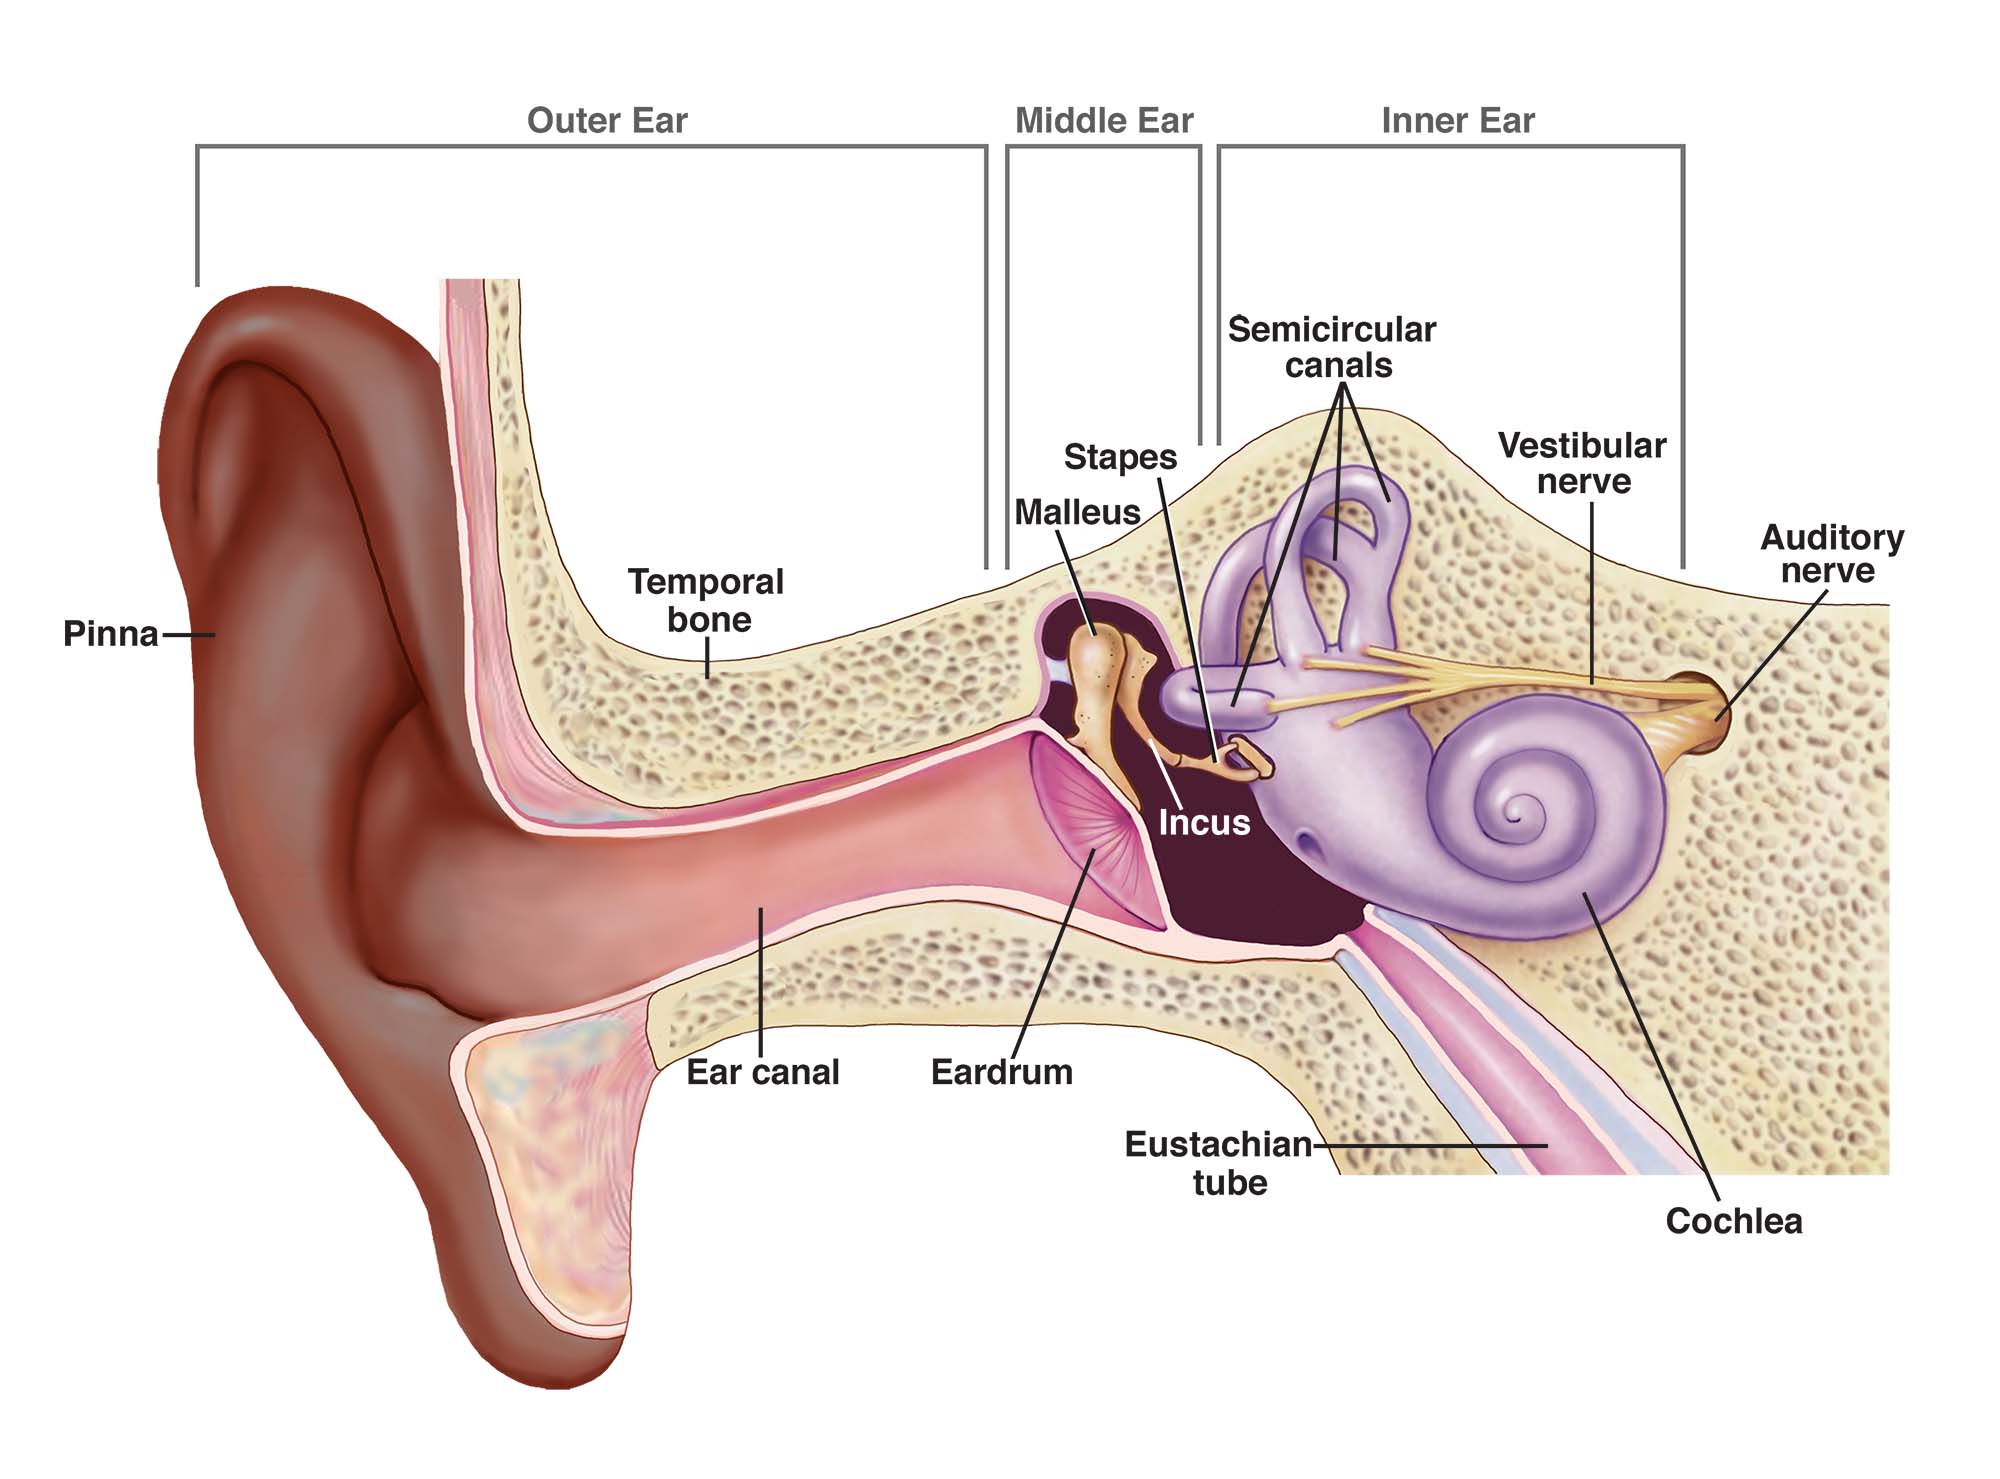 The outer ear includes the pinna, temporal bone, and ear canal. The middle ear includes the eardrum, malleus, incus, and stapes. The inner ear includes semicircular canals, eustachian tube, cochlea, and vestibule and auditory nerves.